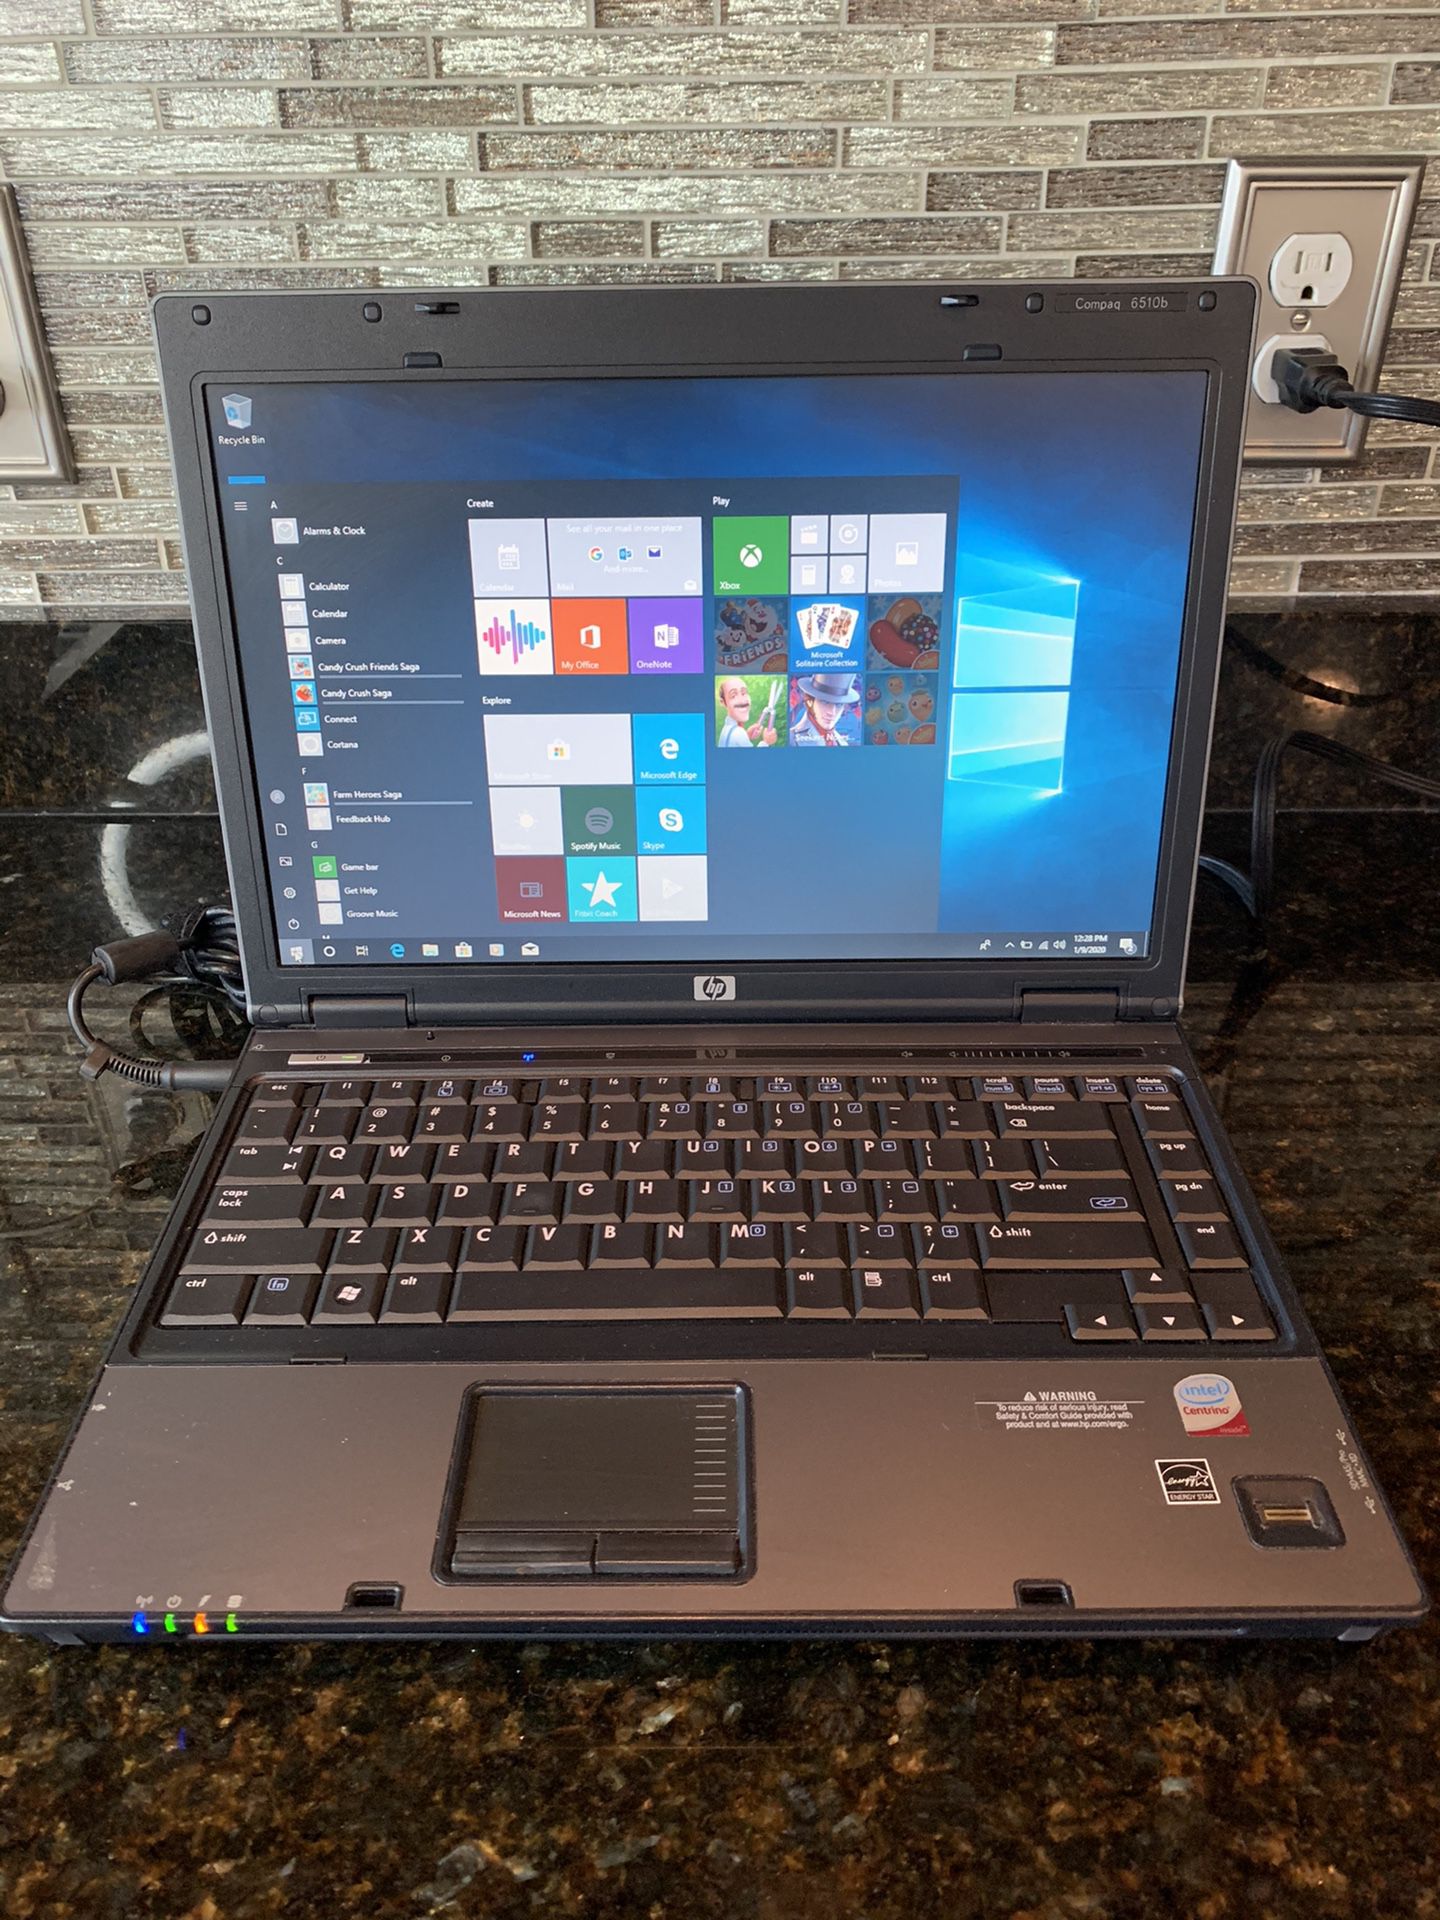 14” HP Compaq 6510b Laptop with Windows 10 and Microsoft office.